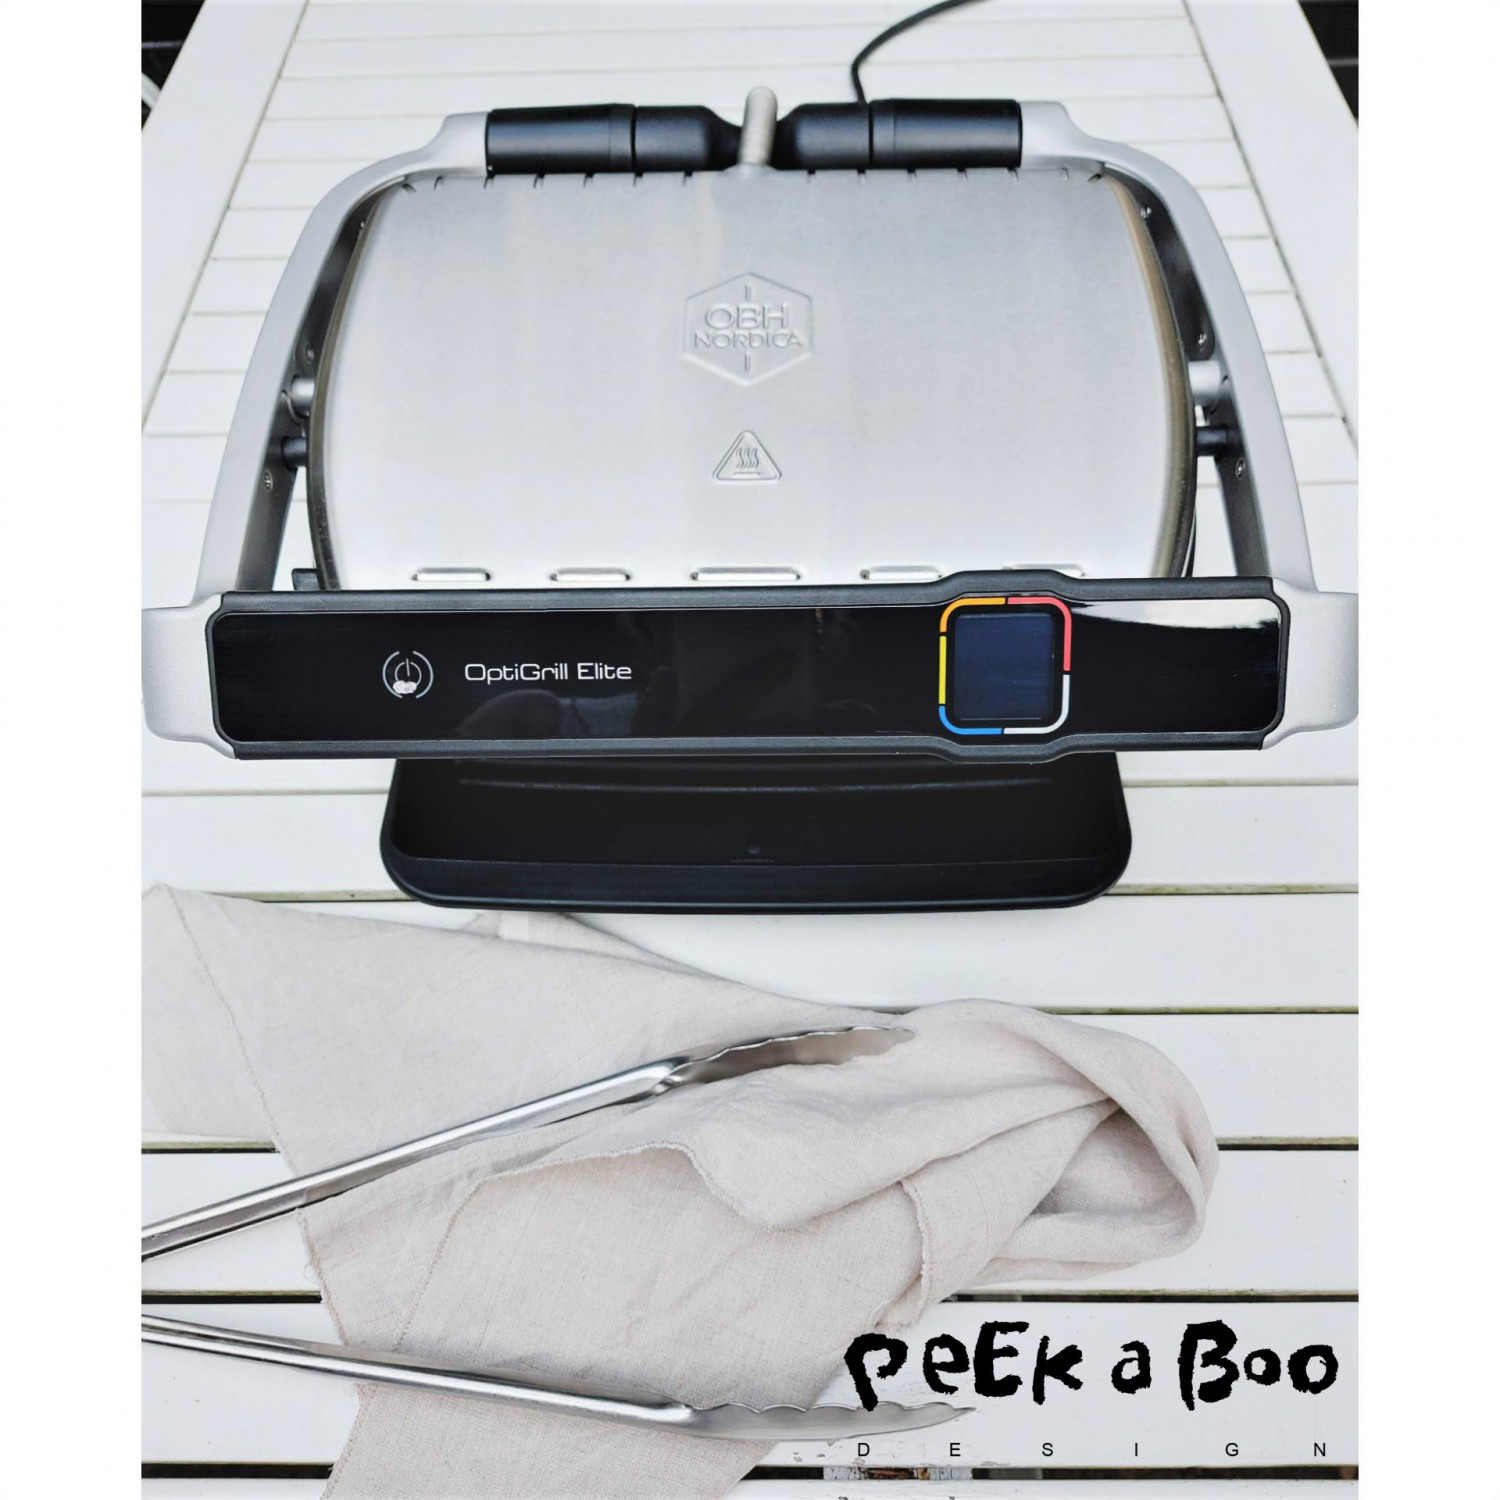 The OBH Opti grill Elite has a simpel design that is suitable also your kitchentable, for preparing lunch as a panini or grilled sandwich. It makes it quick and easy to make a delicious lunch.